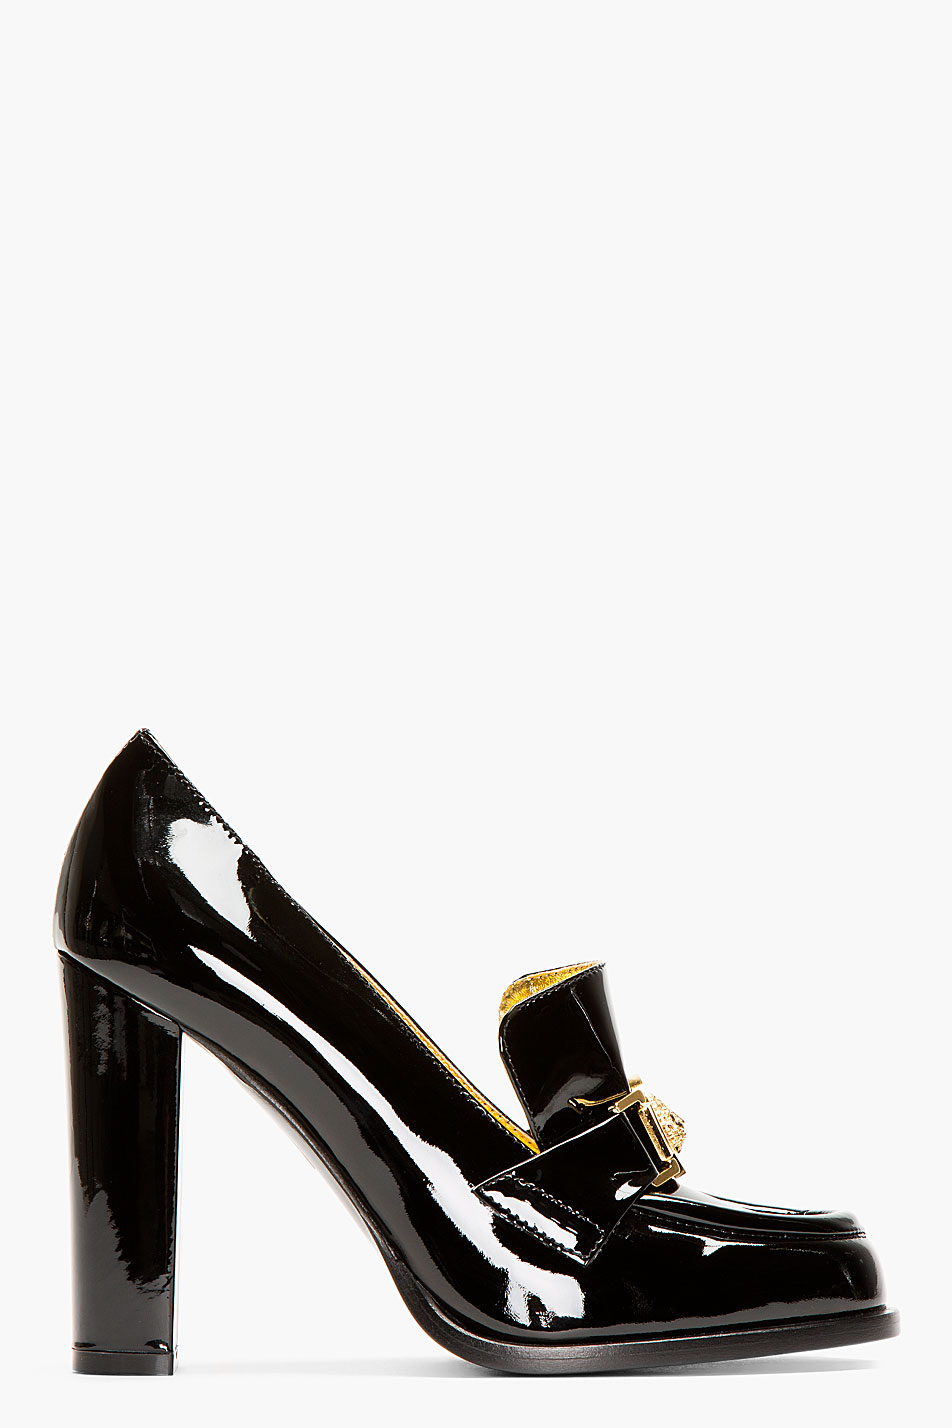 Versus Black Patent Leather Heeled Loafers | Lyst